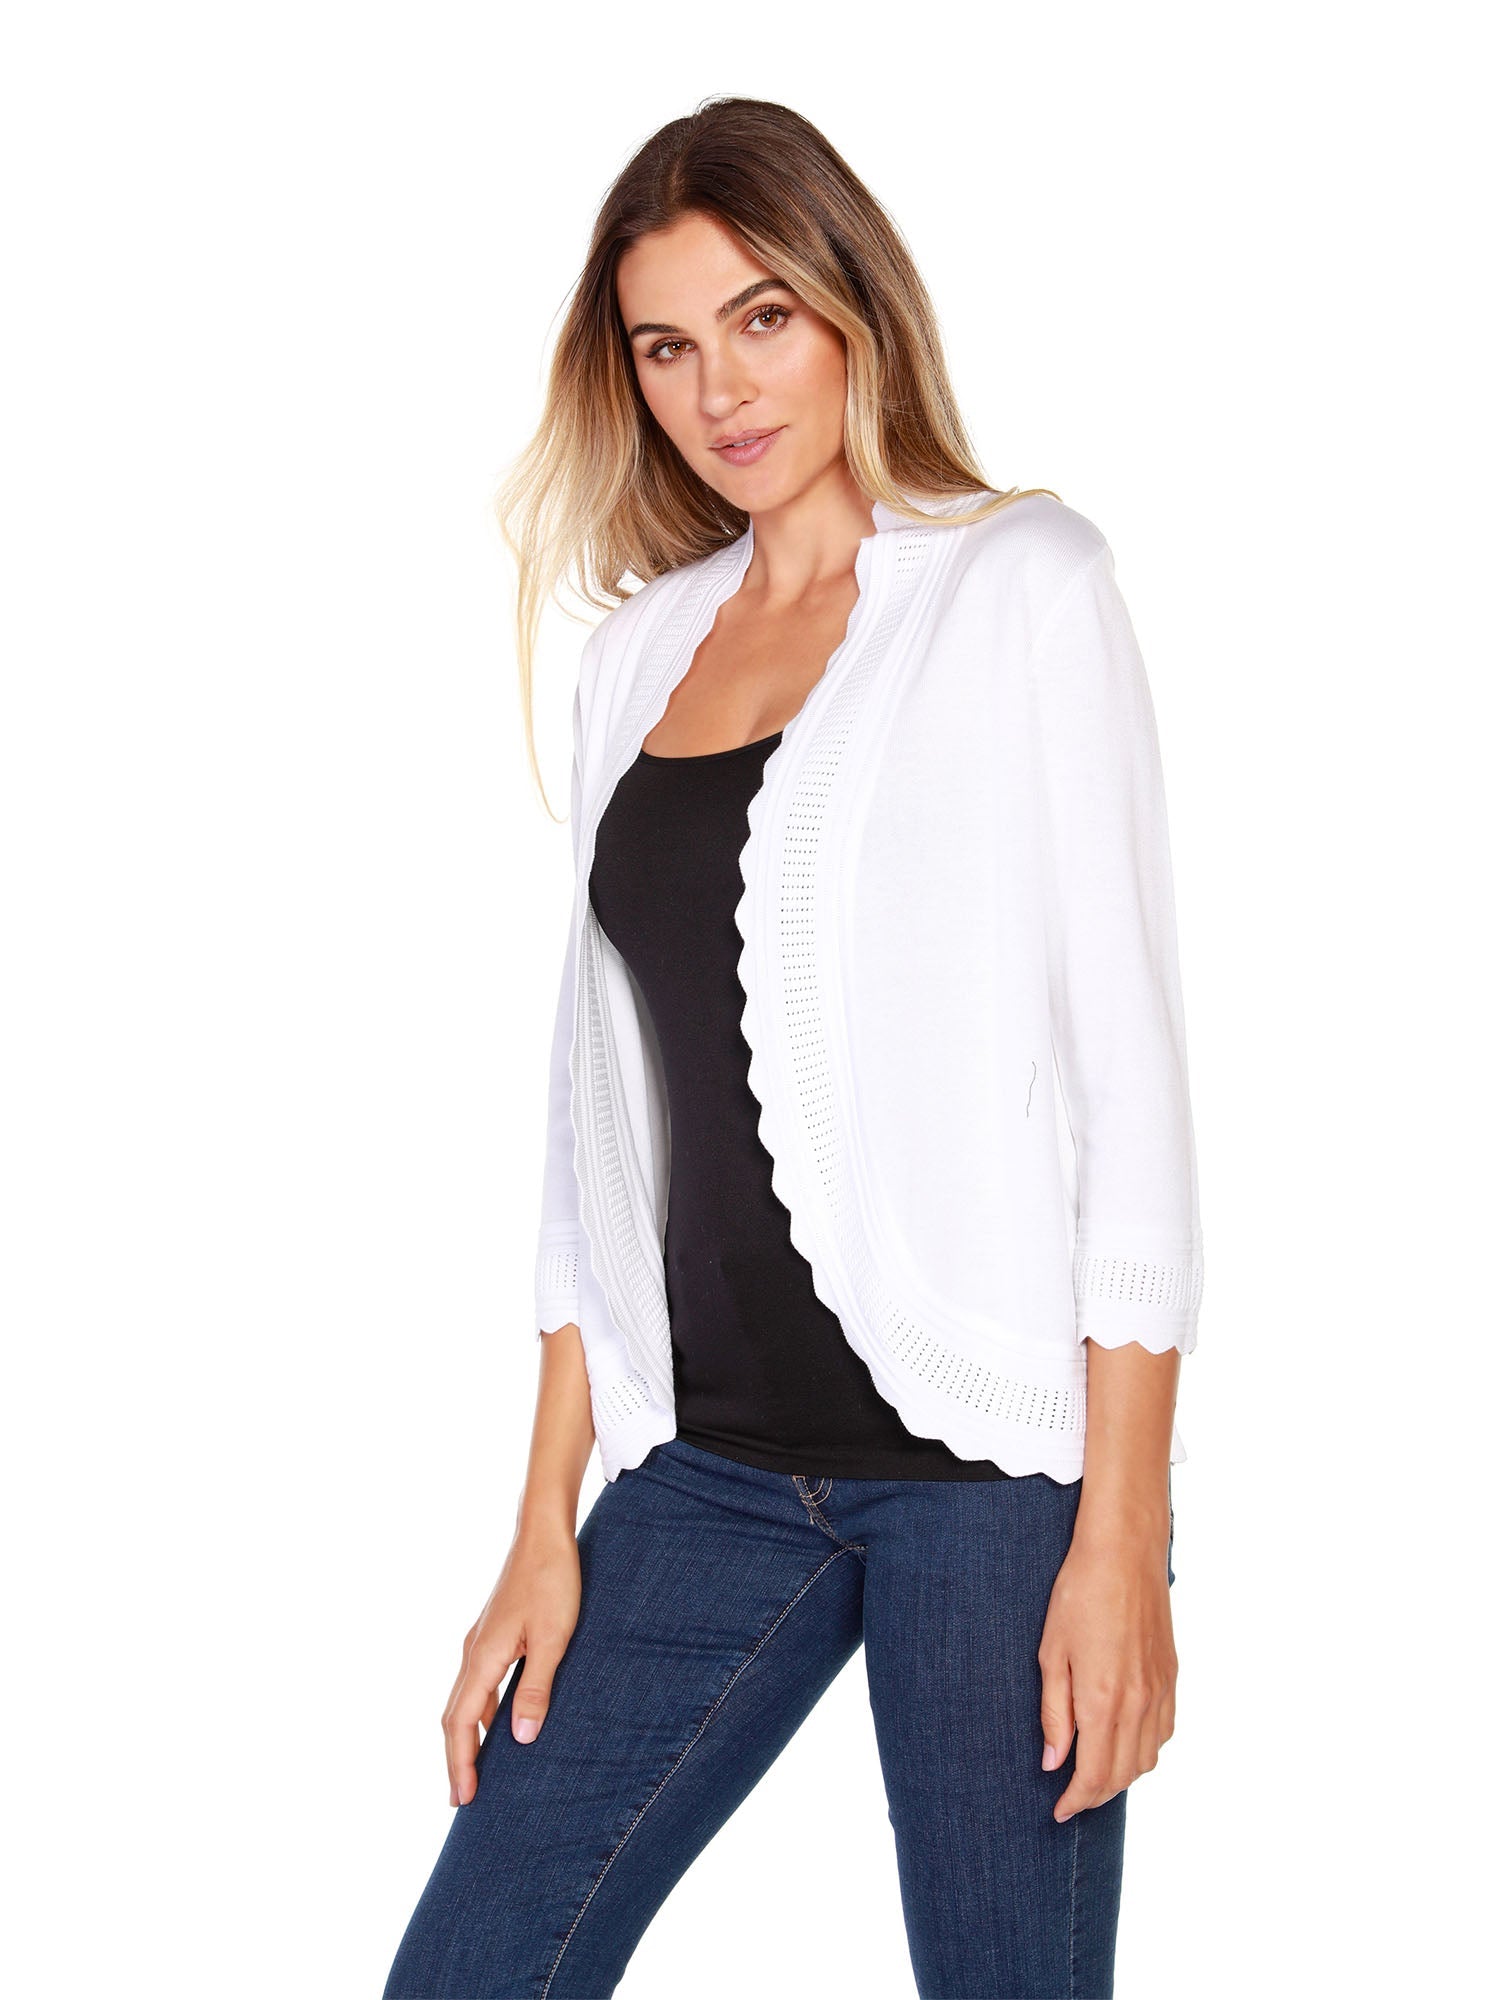 Women's Shrug Cardigan with Rounded Scalloped Edges | Curvy